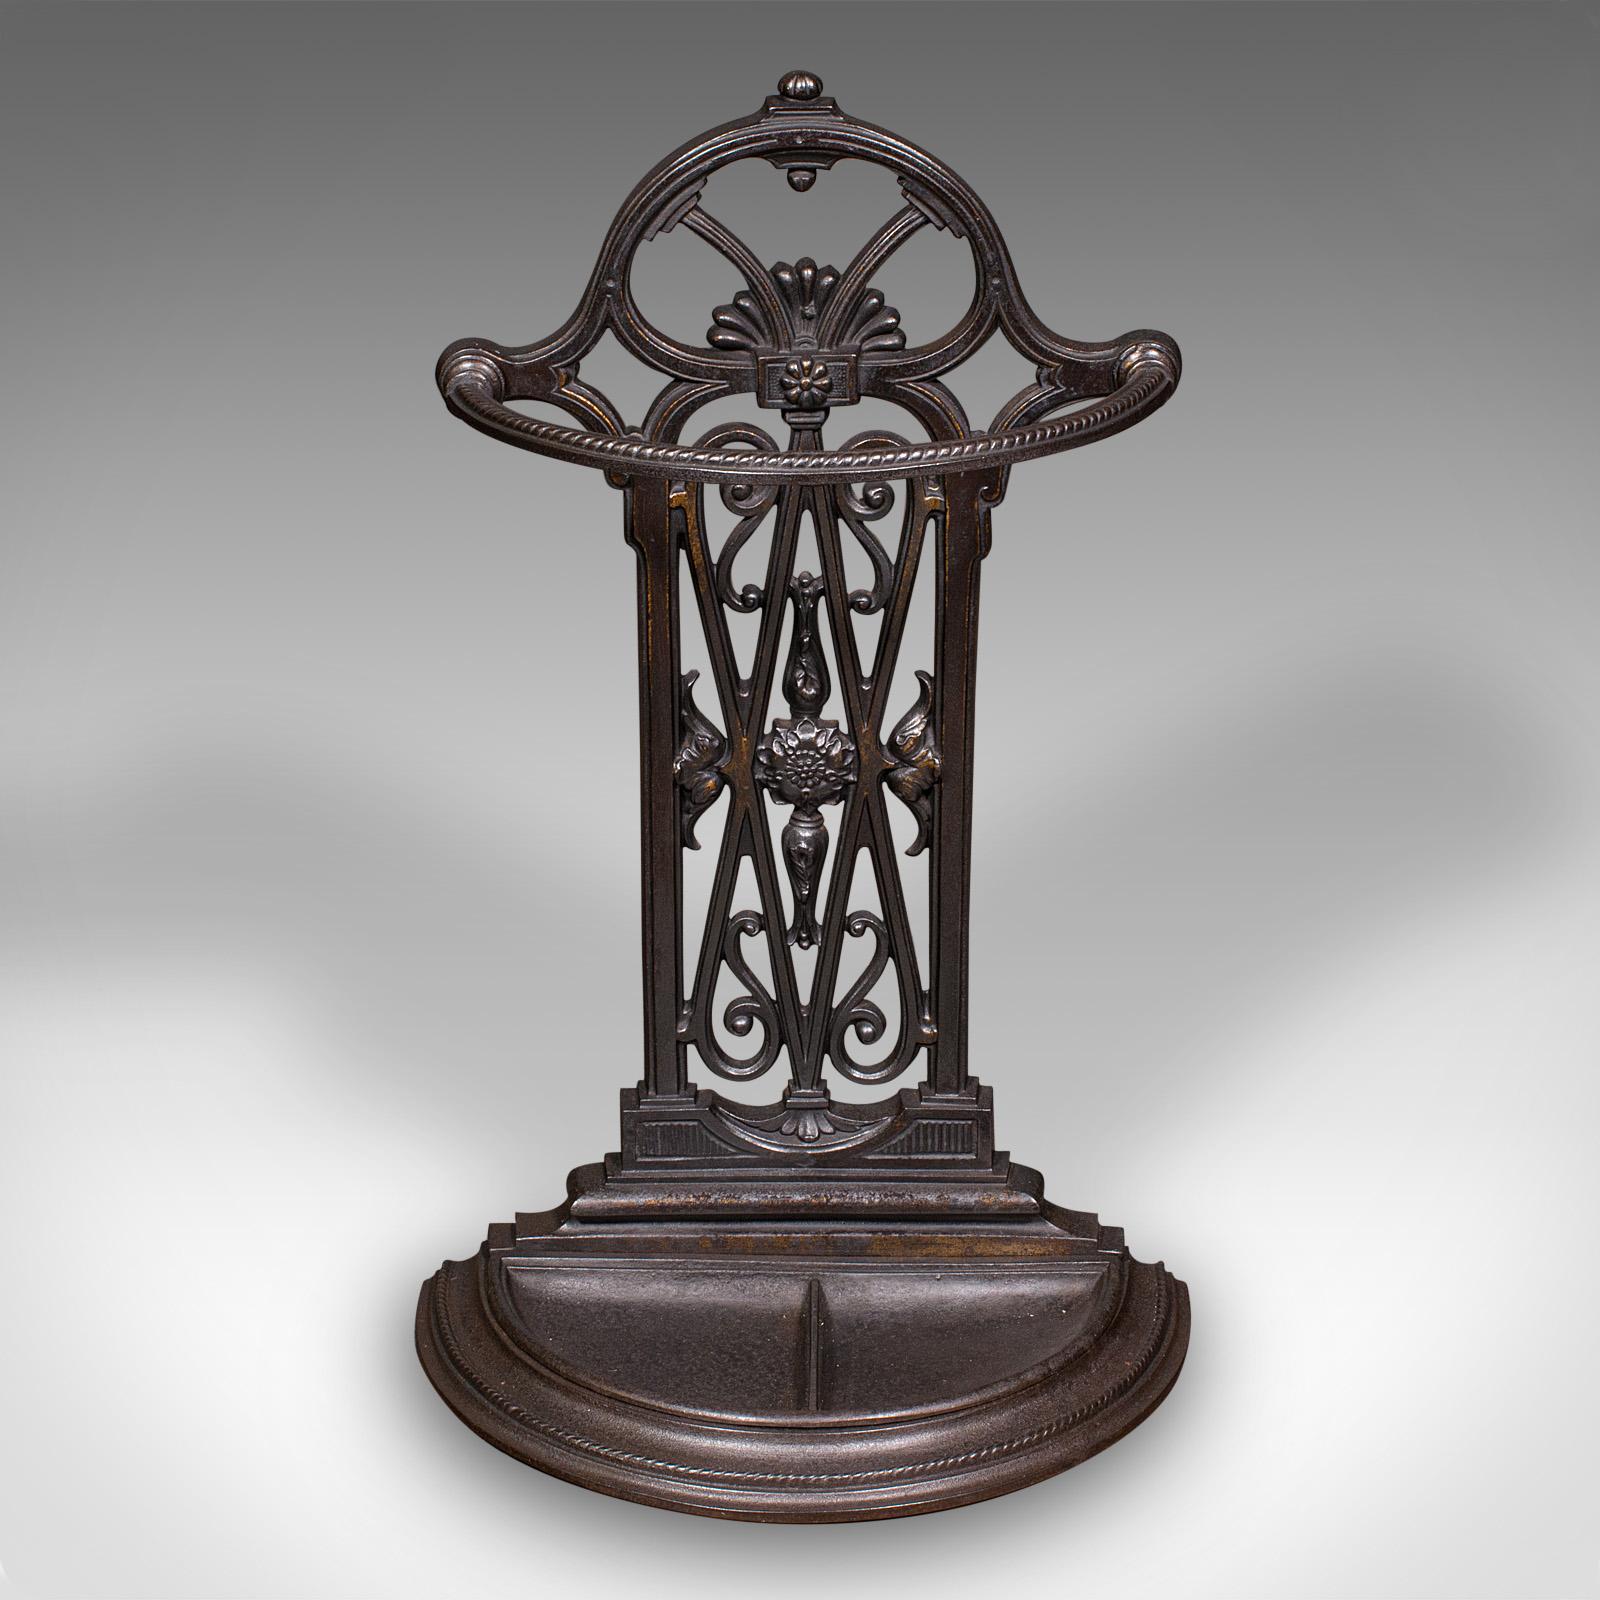 This is an antique demi-lune umbrella rack. An English, cast iron hallway stand, dating to the late Victorian period, circa 1900.

Grand appearance for this fine entrance hall stand
Displaying a desirable aged patina and in good order
Quality